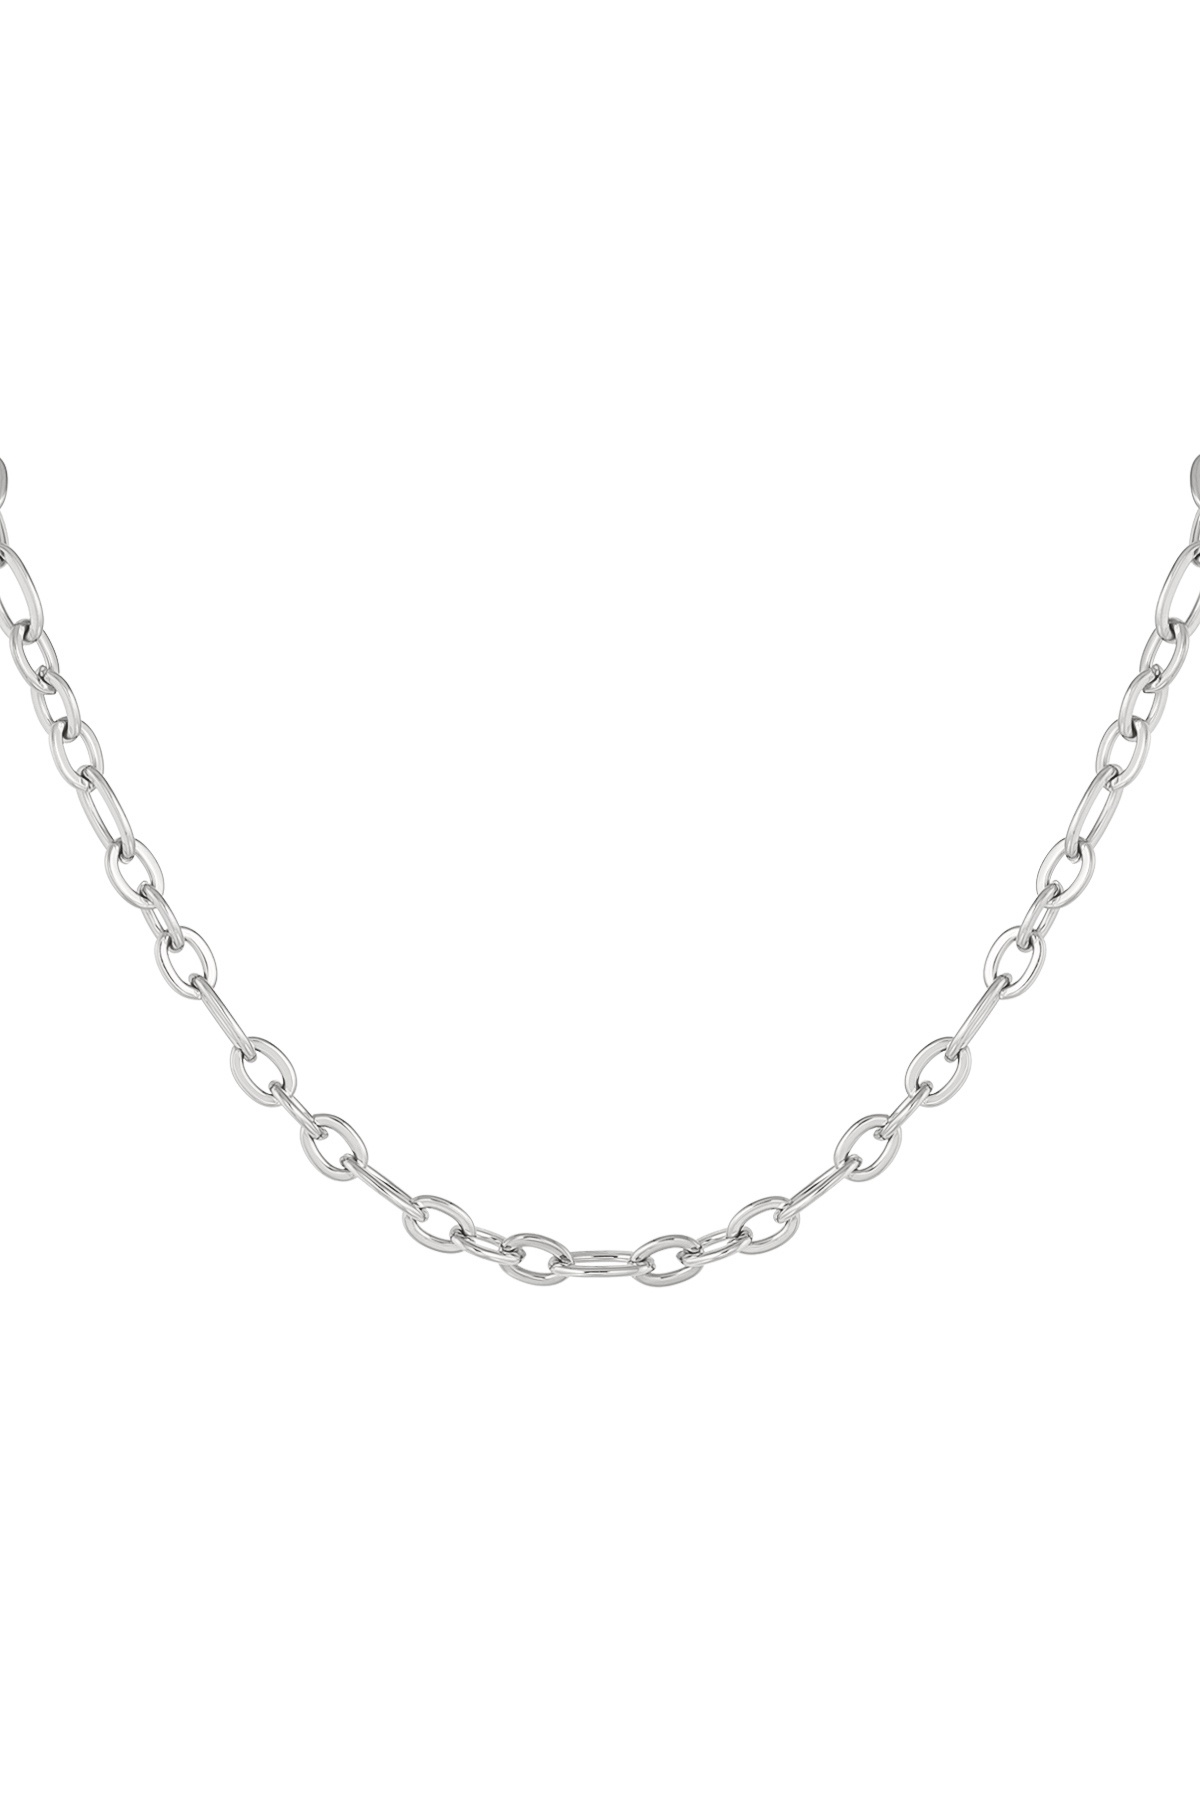 Chain basic link - silver h5 